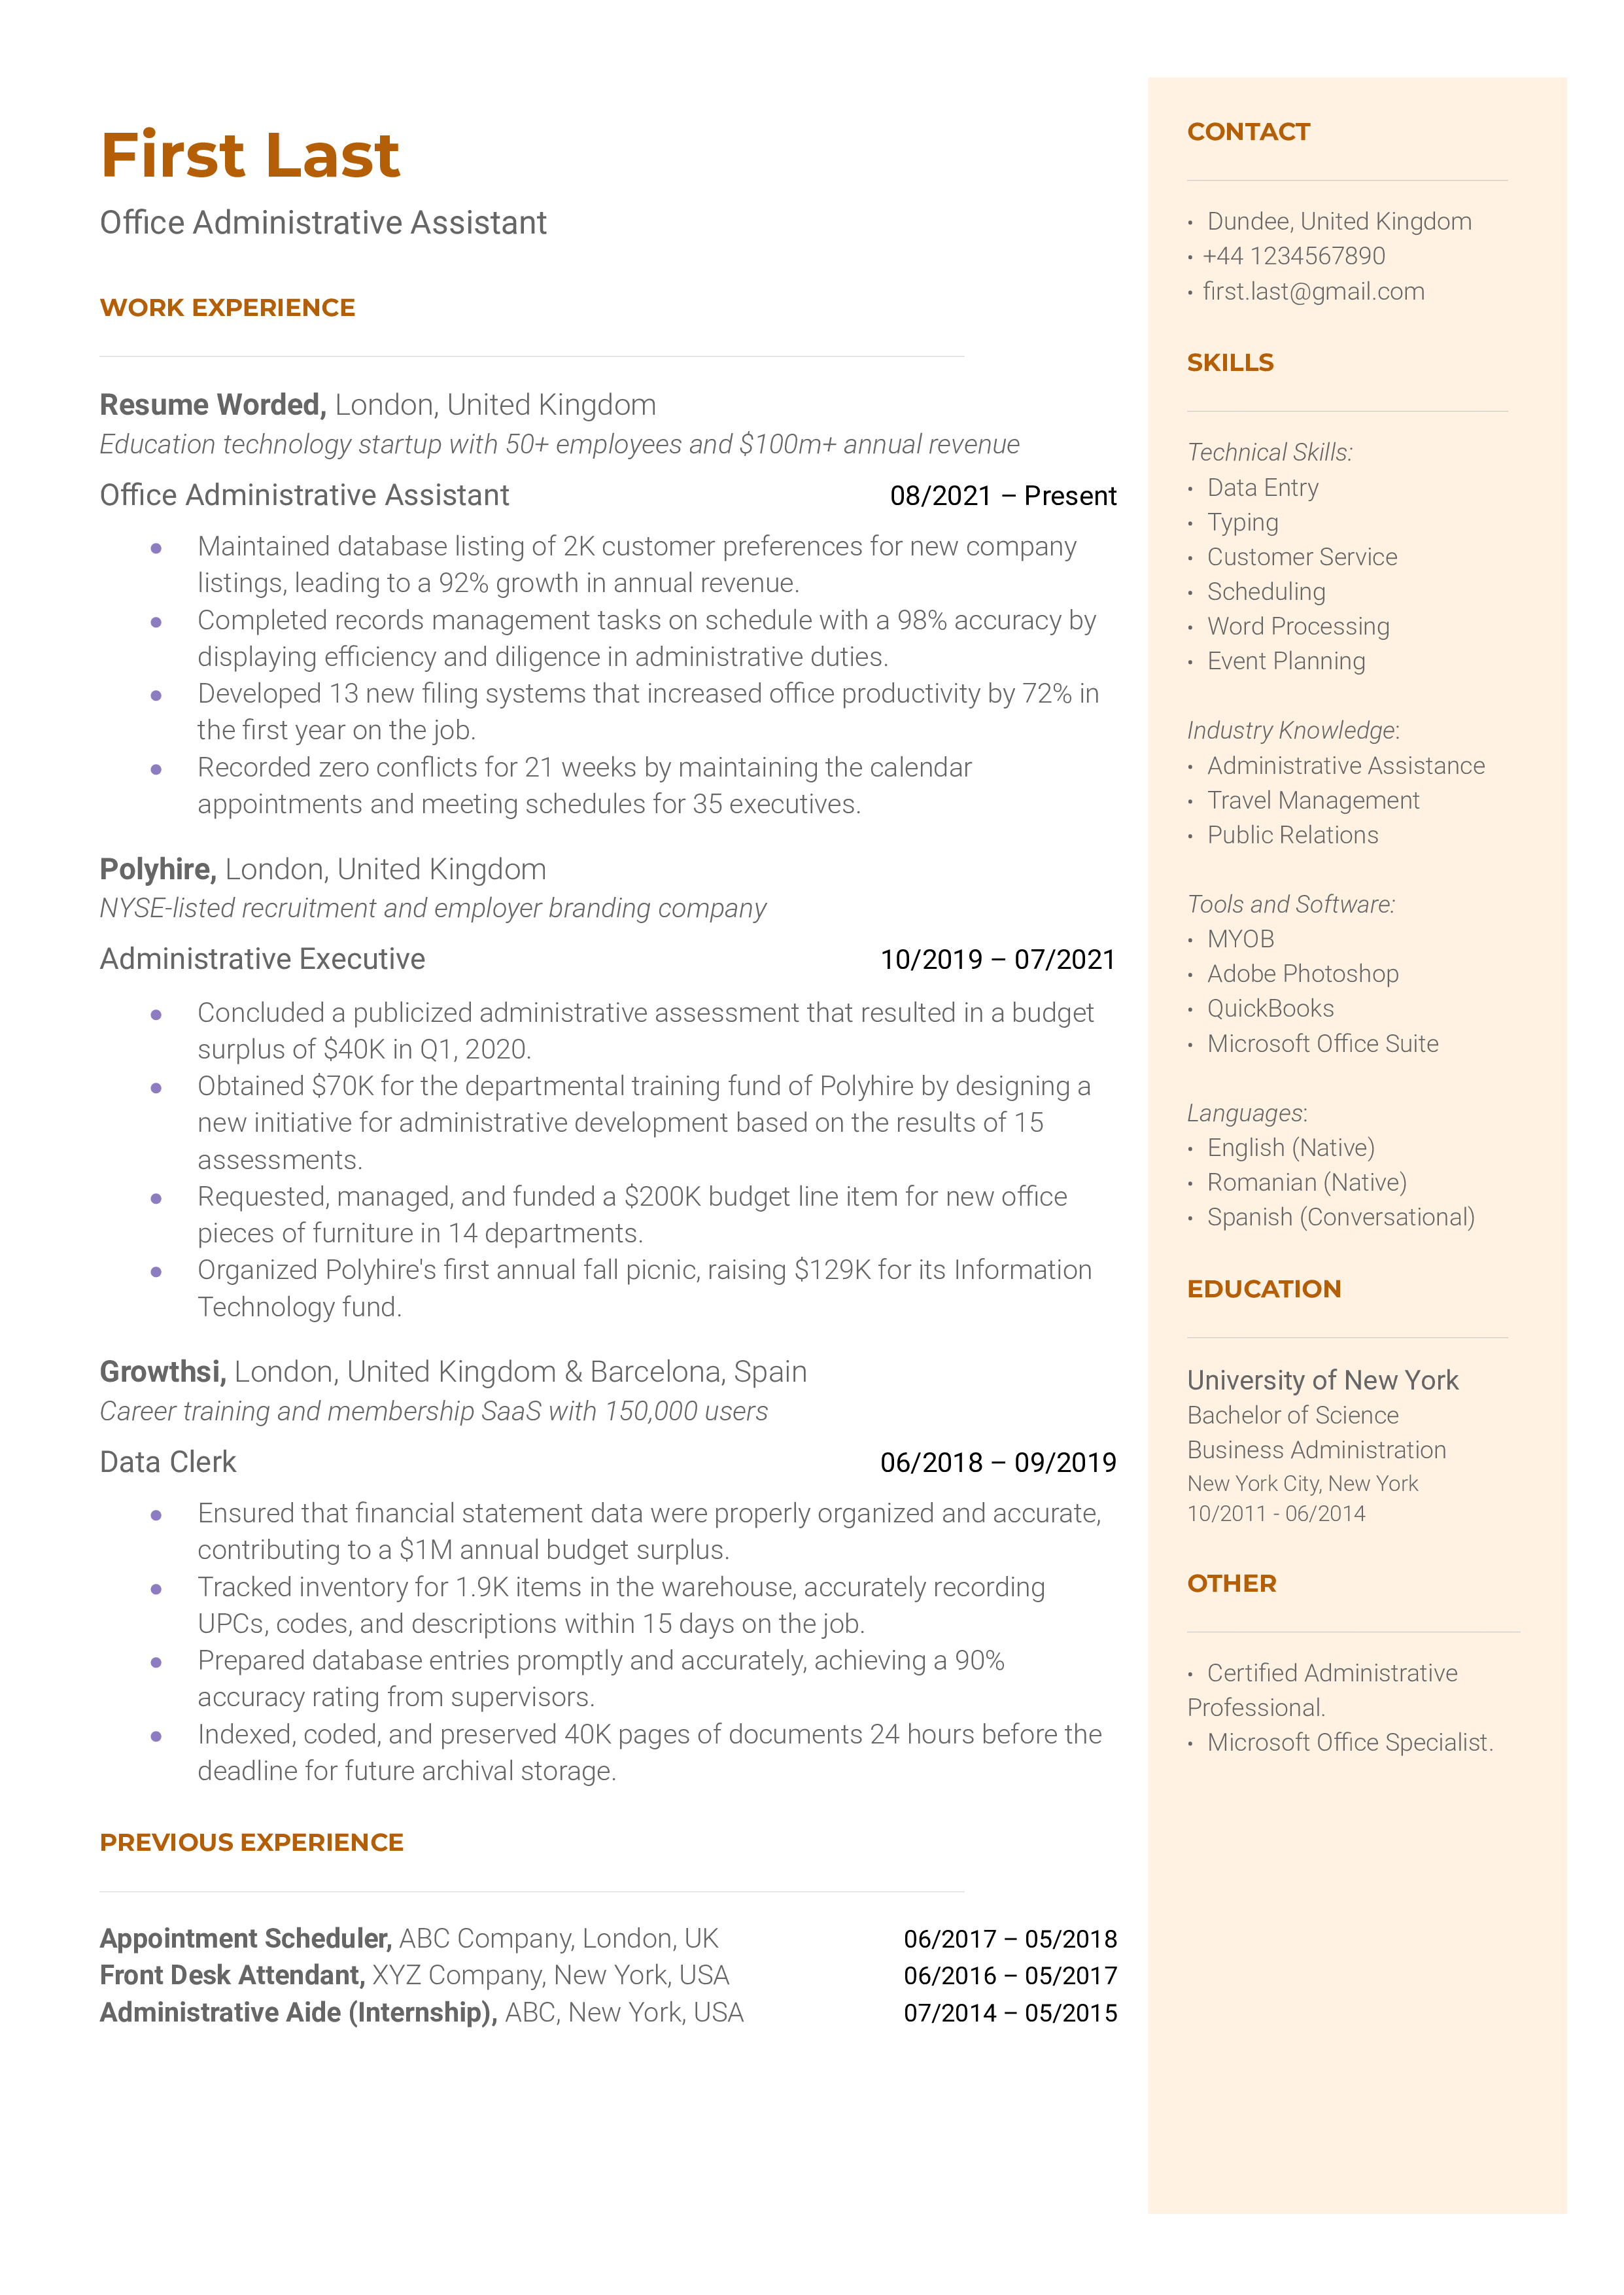 Office Administrative Assistant Resume Sample